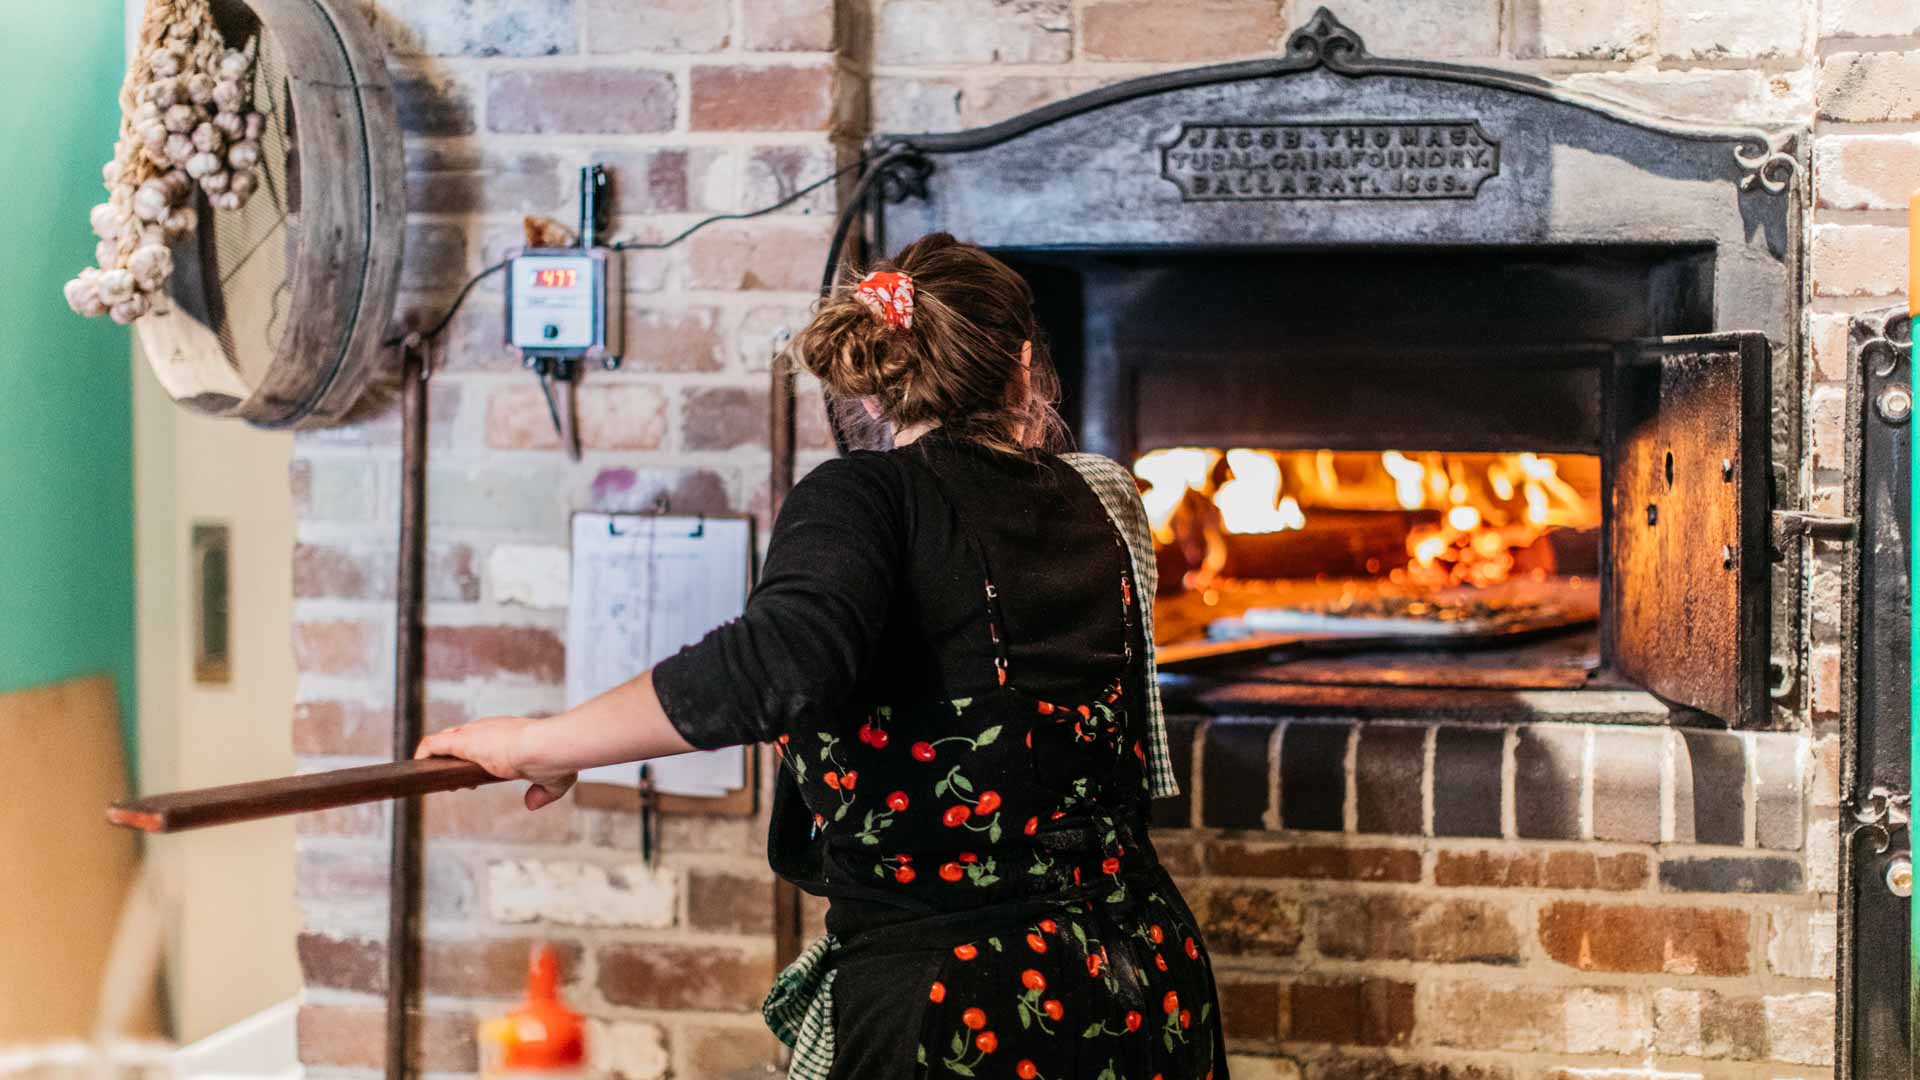 Cherry Moon Is the Inner West's New General Store, Cafe and Woodfired Bakery